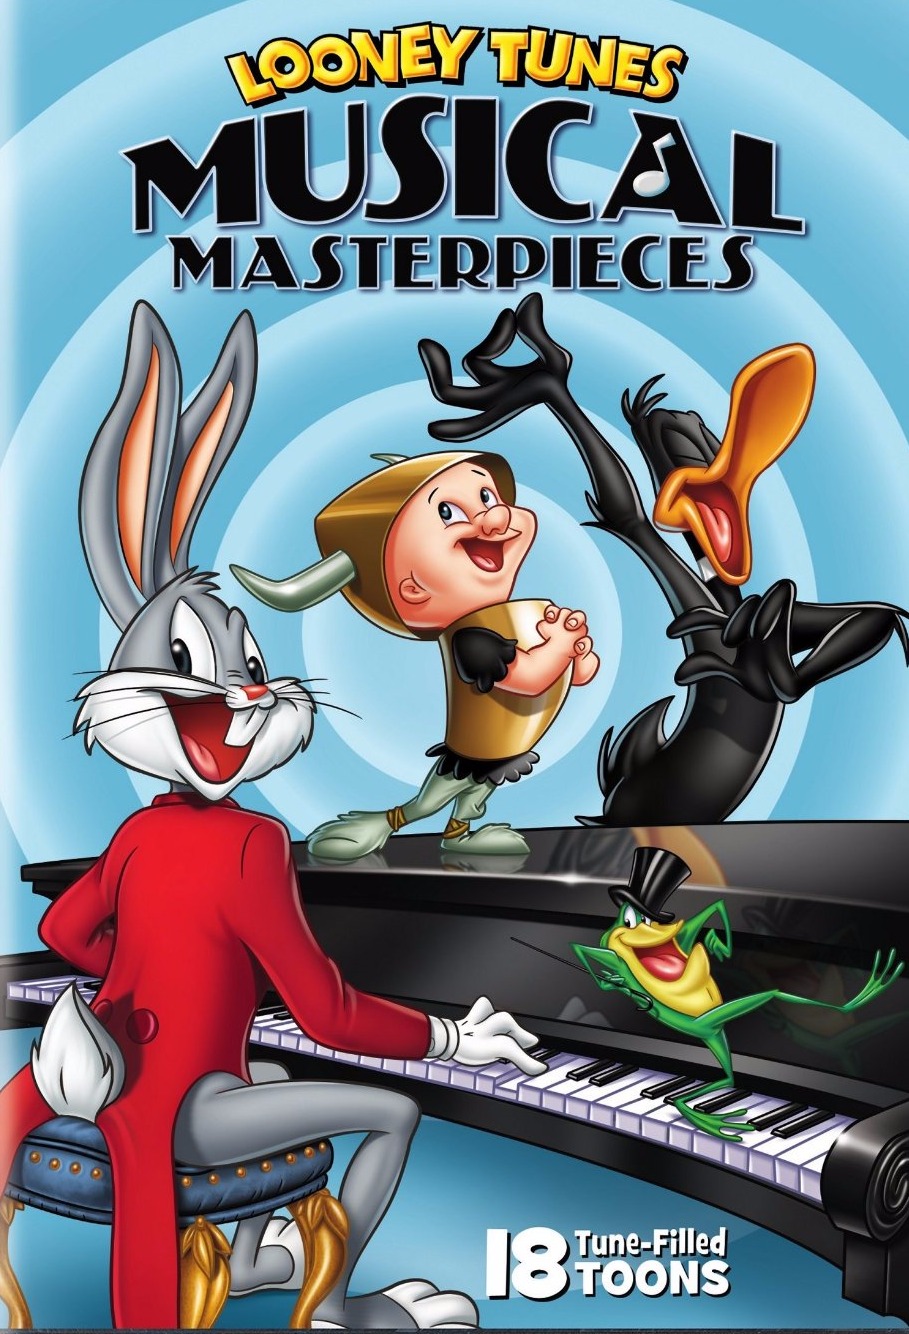 Looney Tunes Musical Masterpieces full collection 